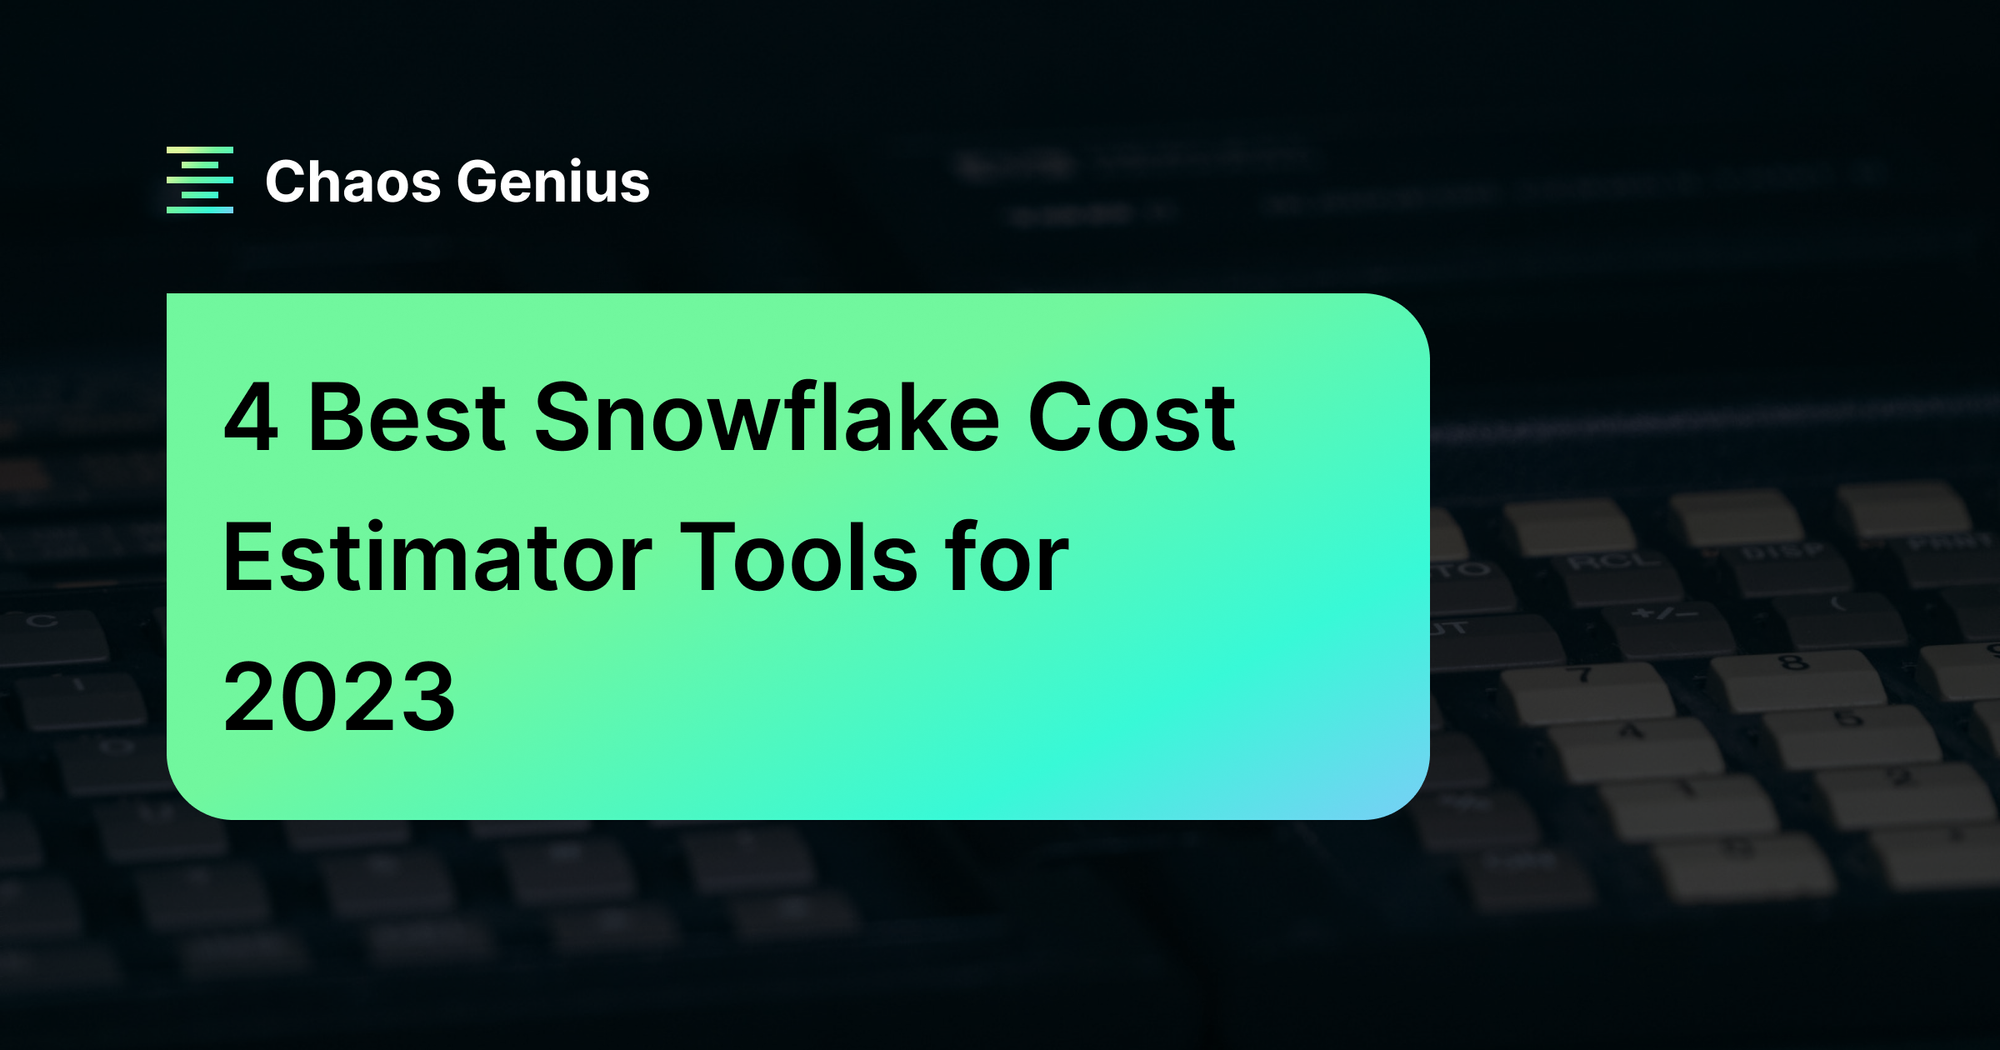 4-best-snowflake-cost-estimator-tools-for-2023